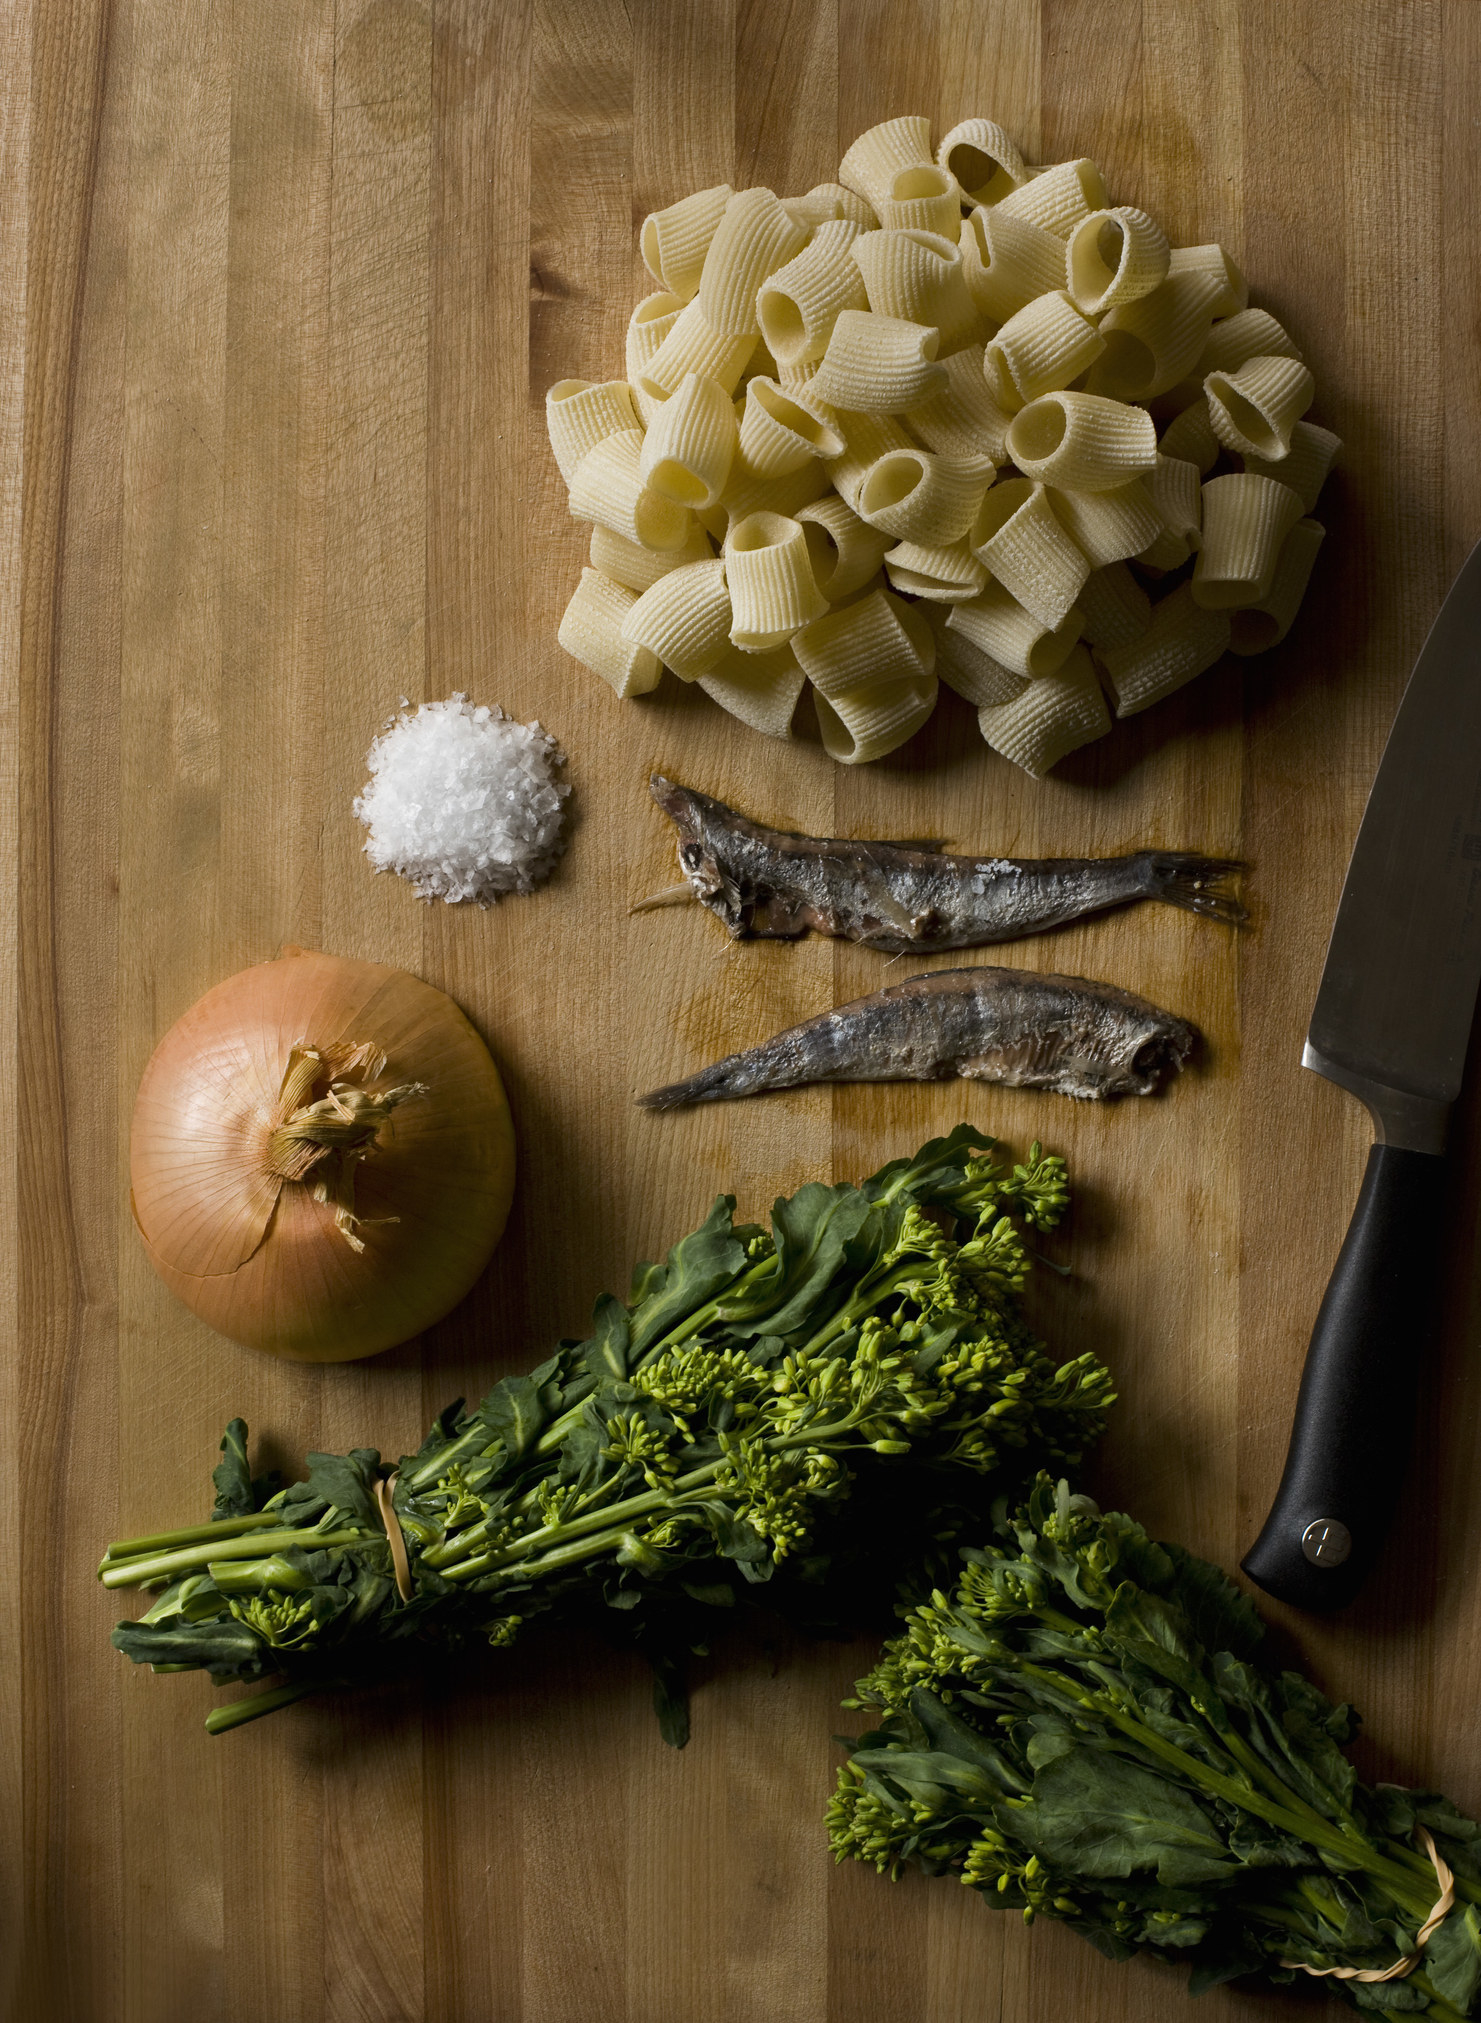 Ingredients for pasta with broccolini and anchovies.